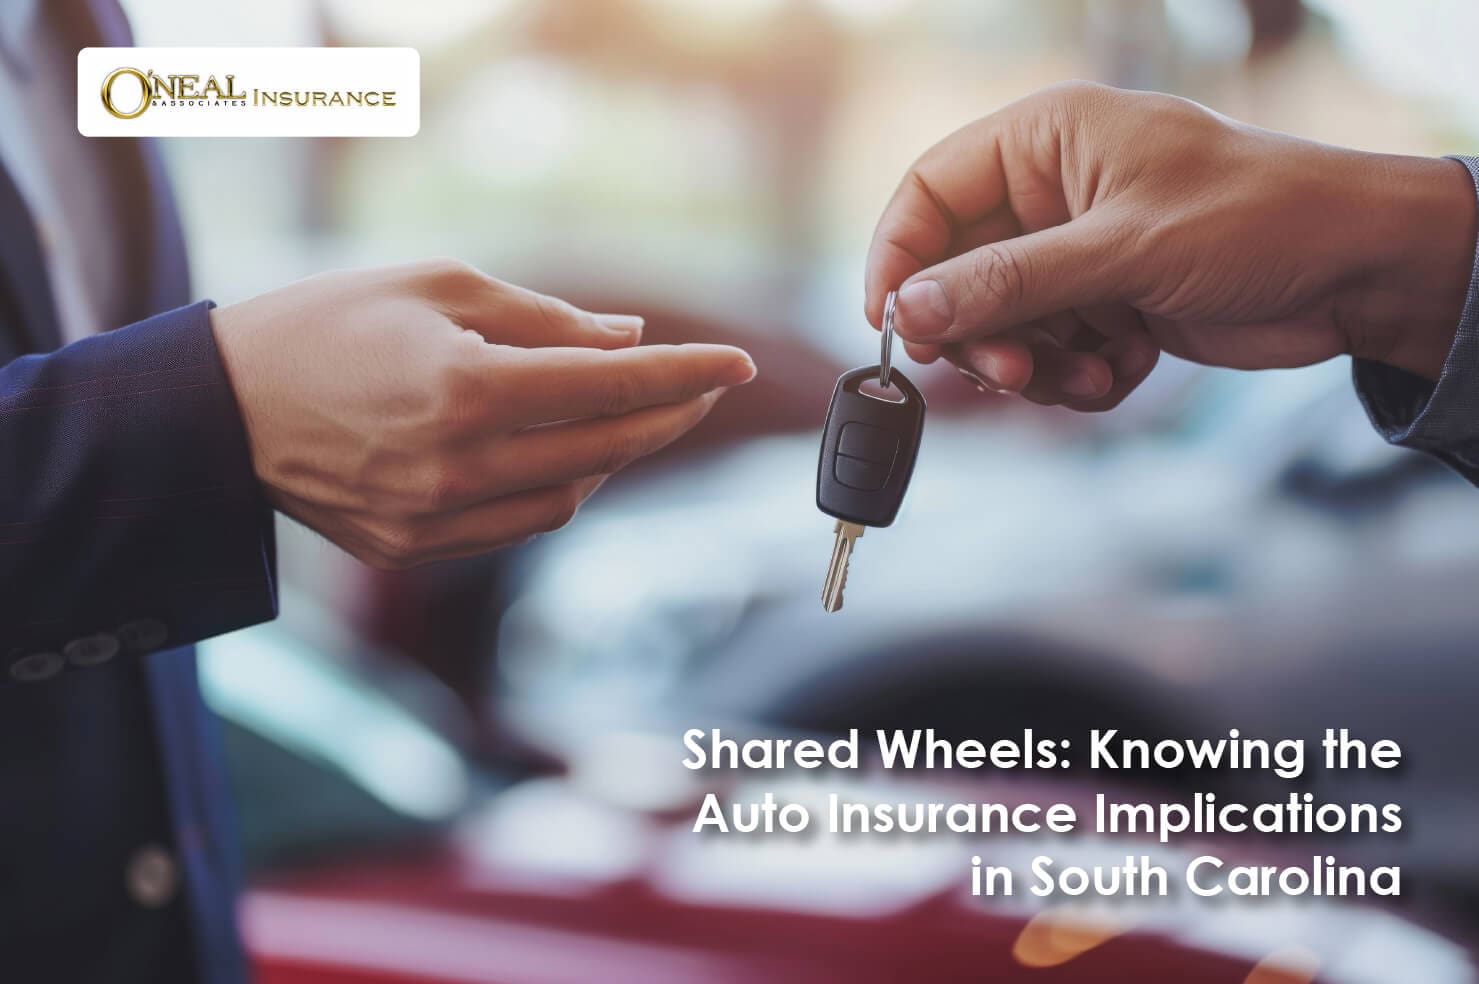 Shared Wheels: Knowing the Auto Insurance Implications in South Carolina